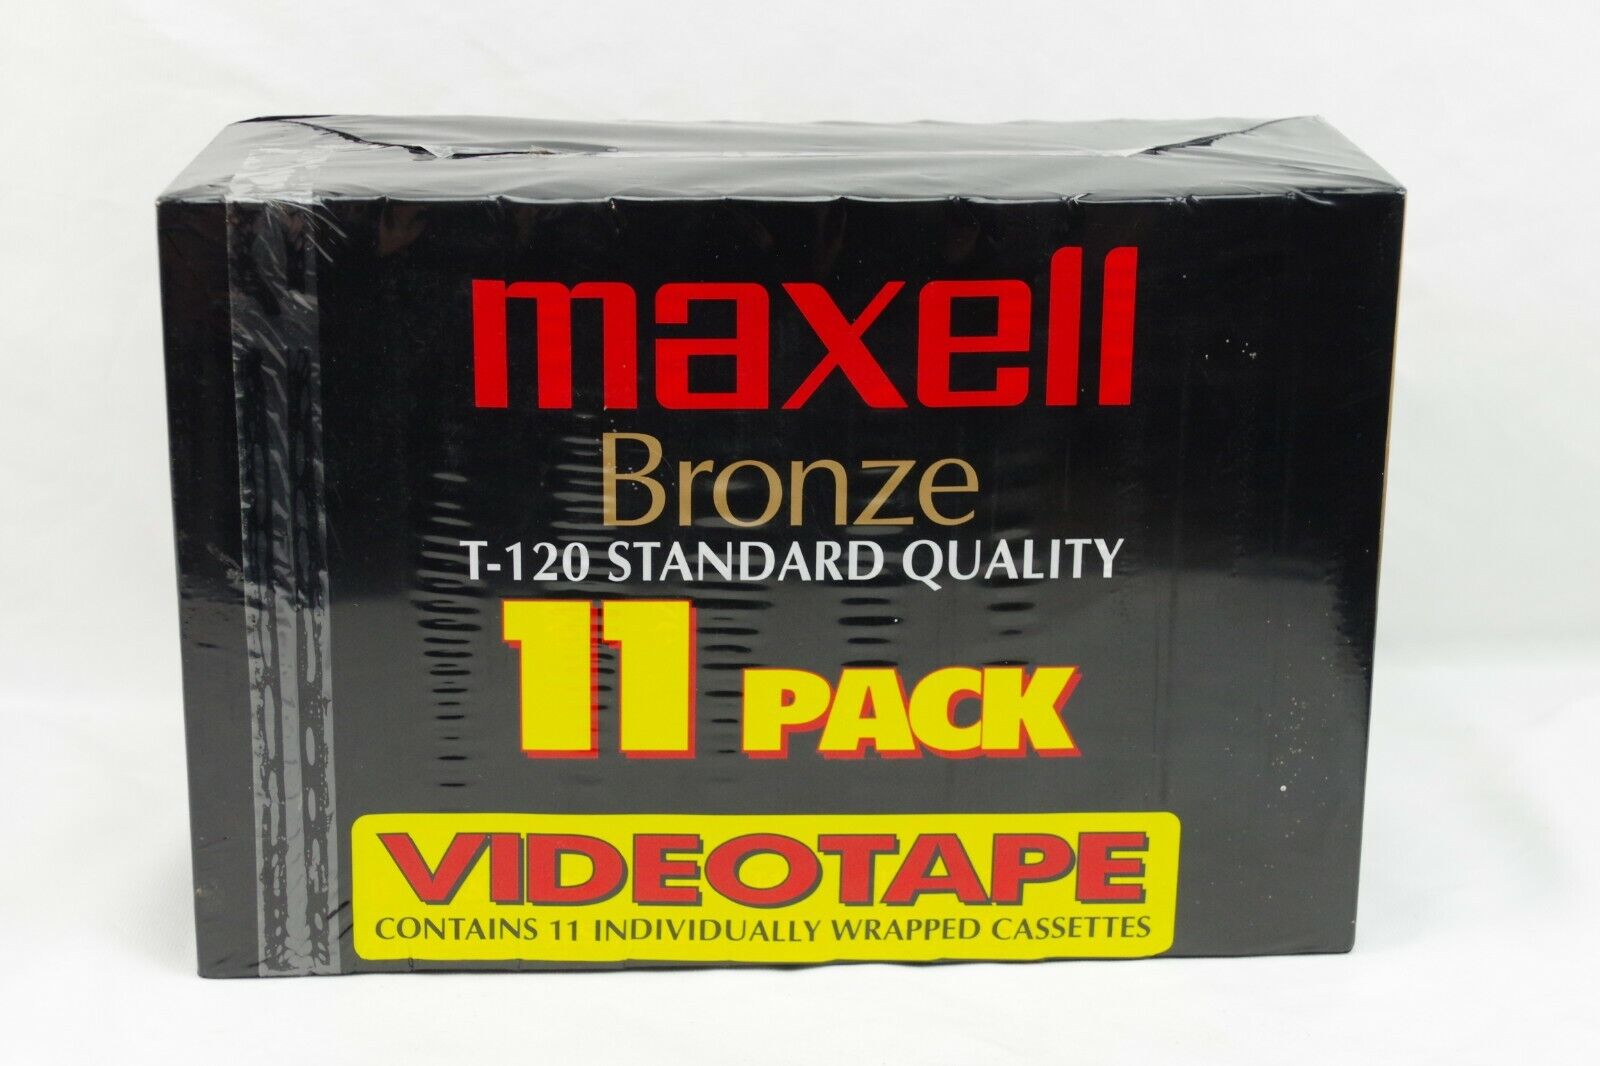 Maxell Bronze T-120 Standard Quality - 11 pack New Sealed VHS